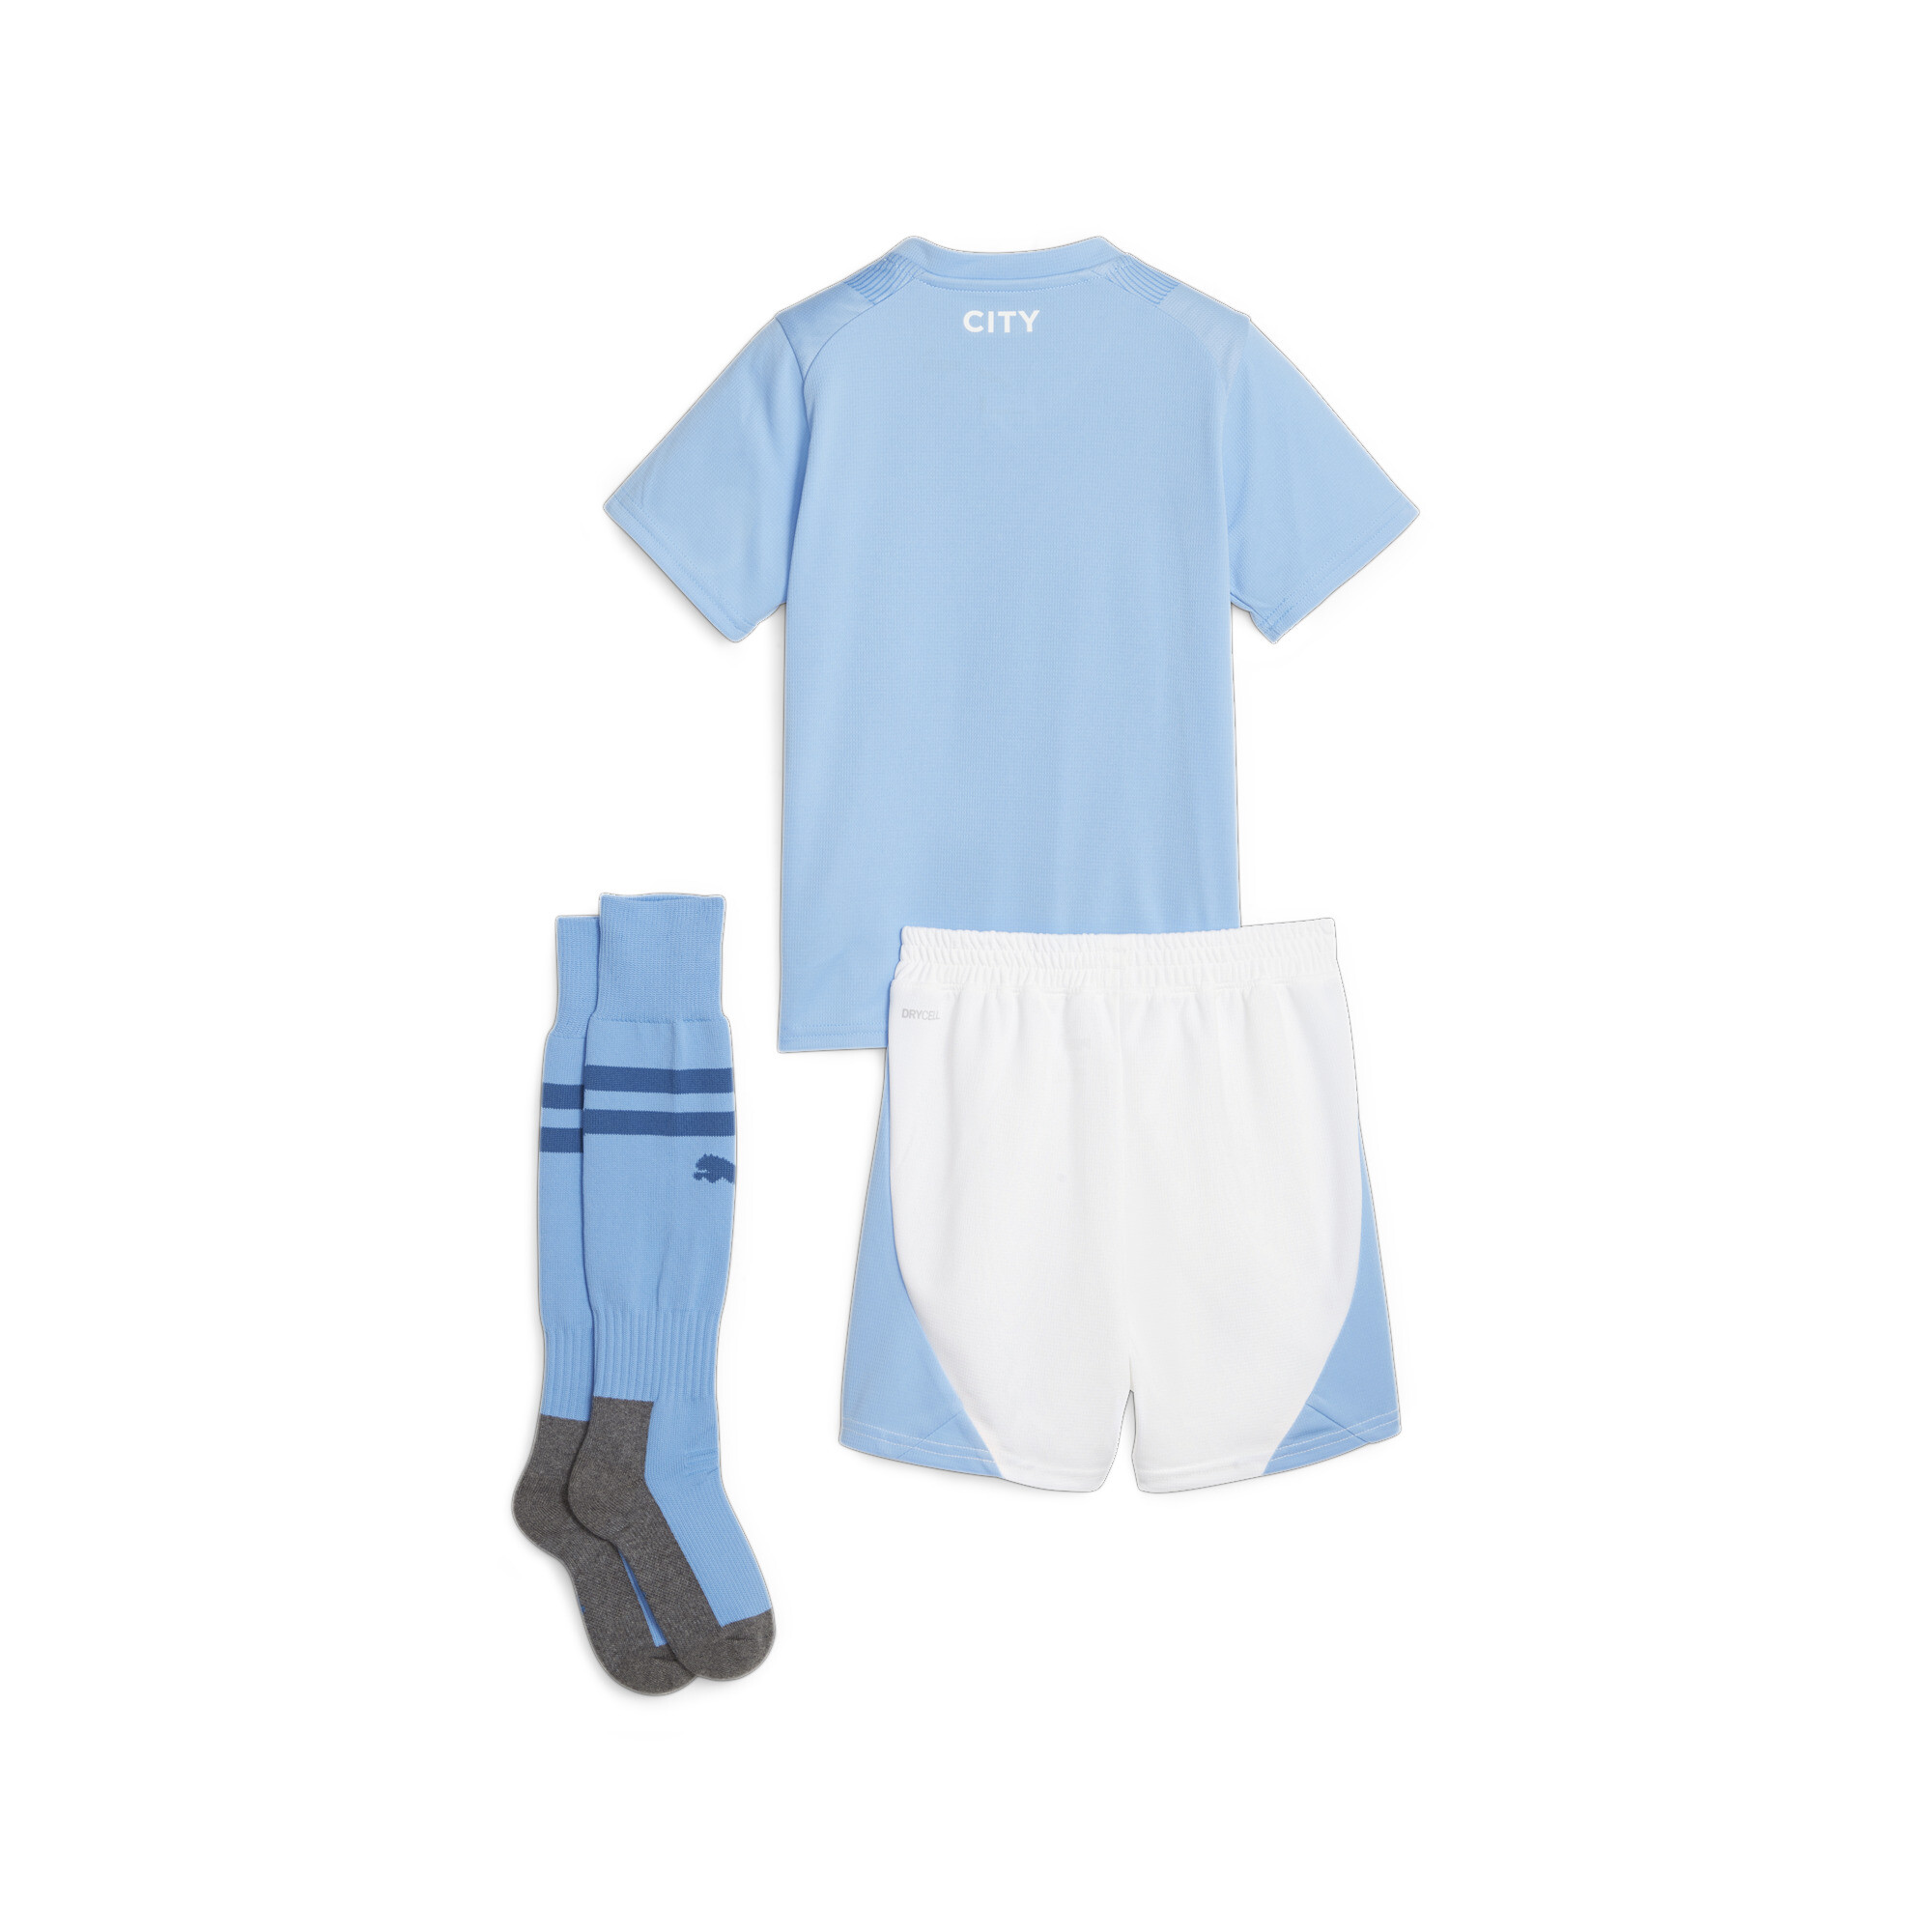 Puma Manchester City F.C. Home Mini Kit Youth, Blue, Size 3-4Y, Clothing